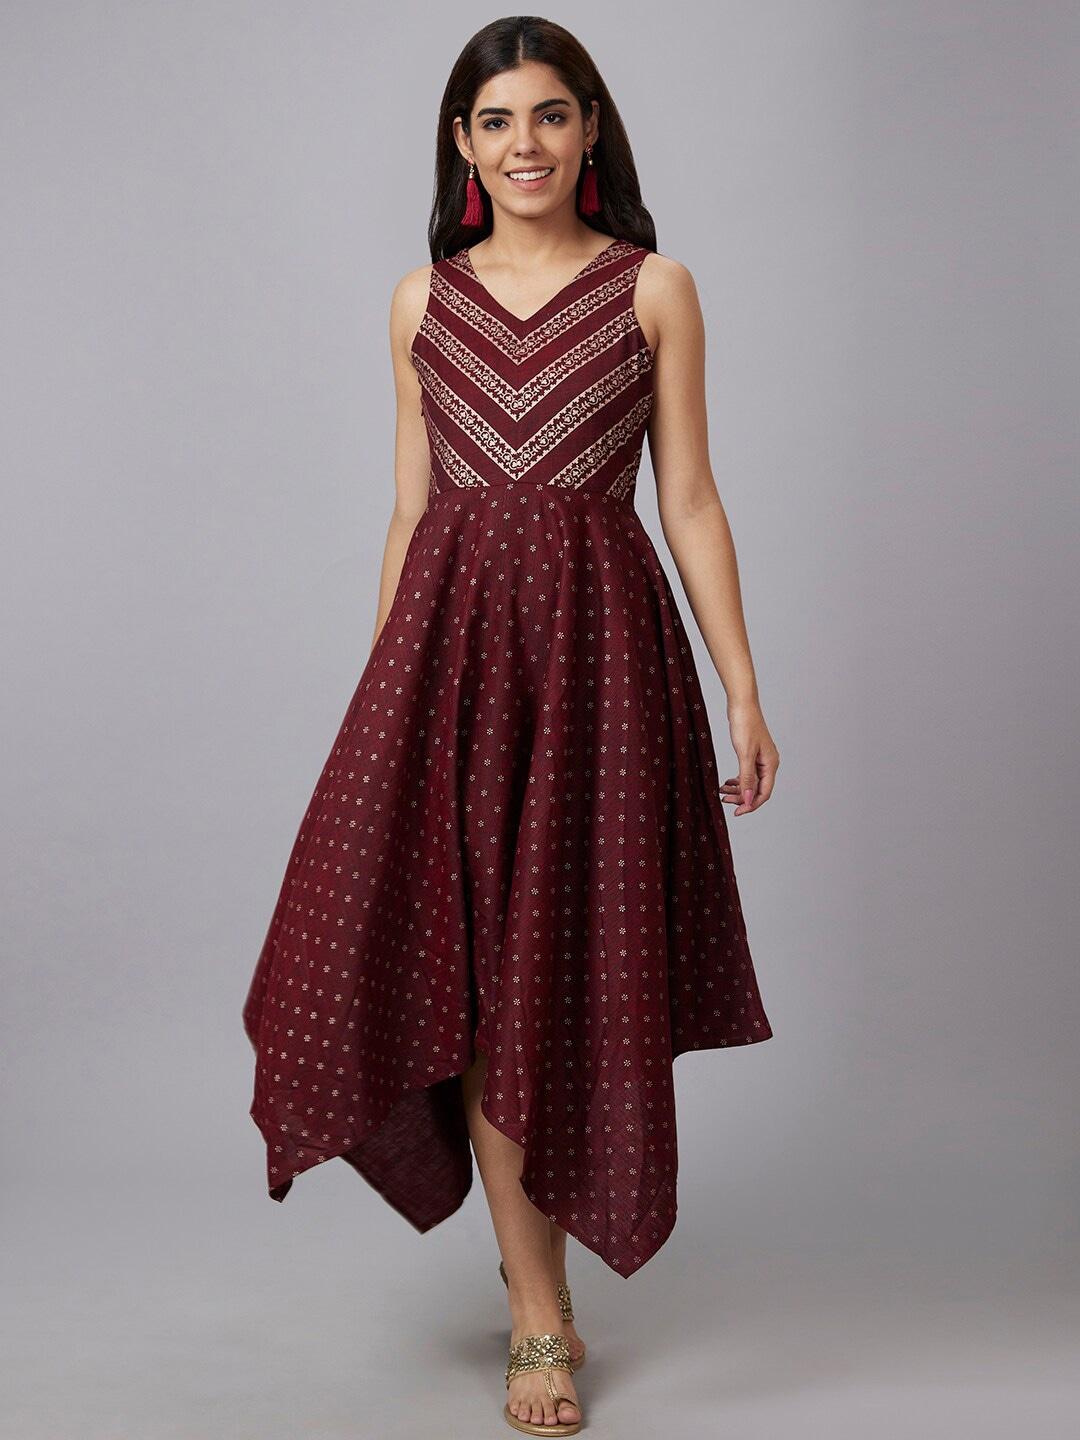 Globus Red Ethnic Motifs Printed V-Neck Fit and Flare Maxi Dress